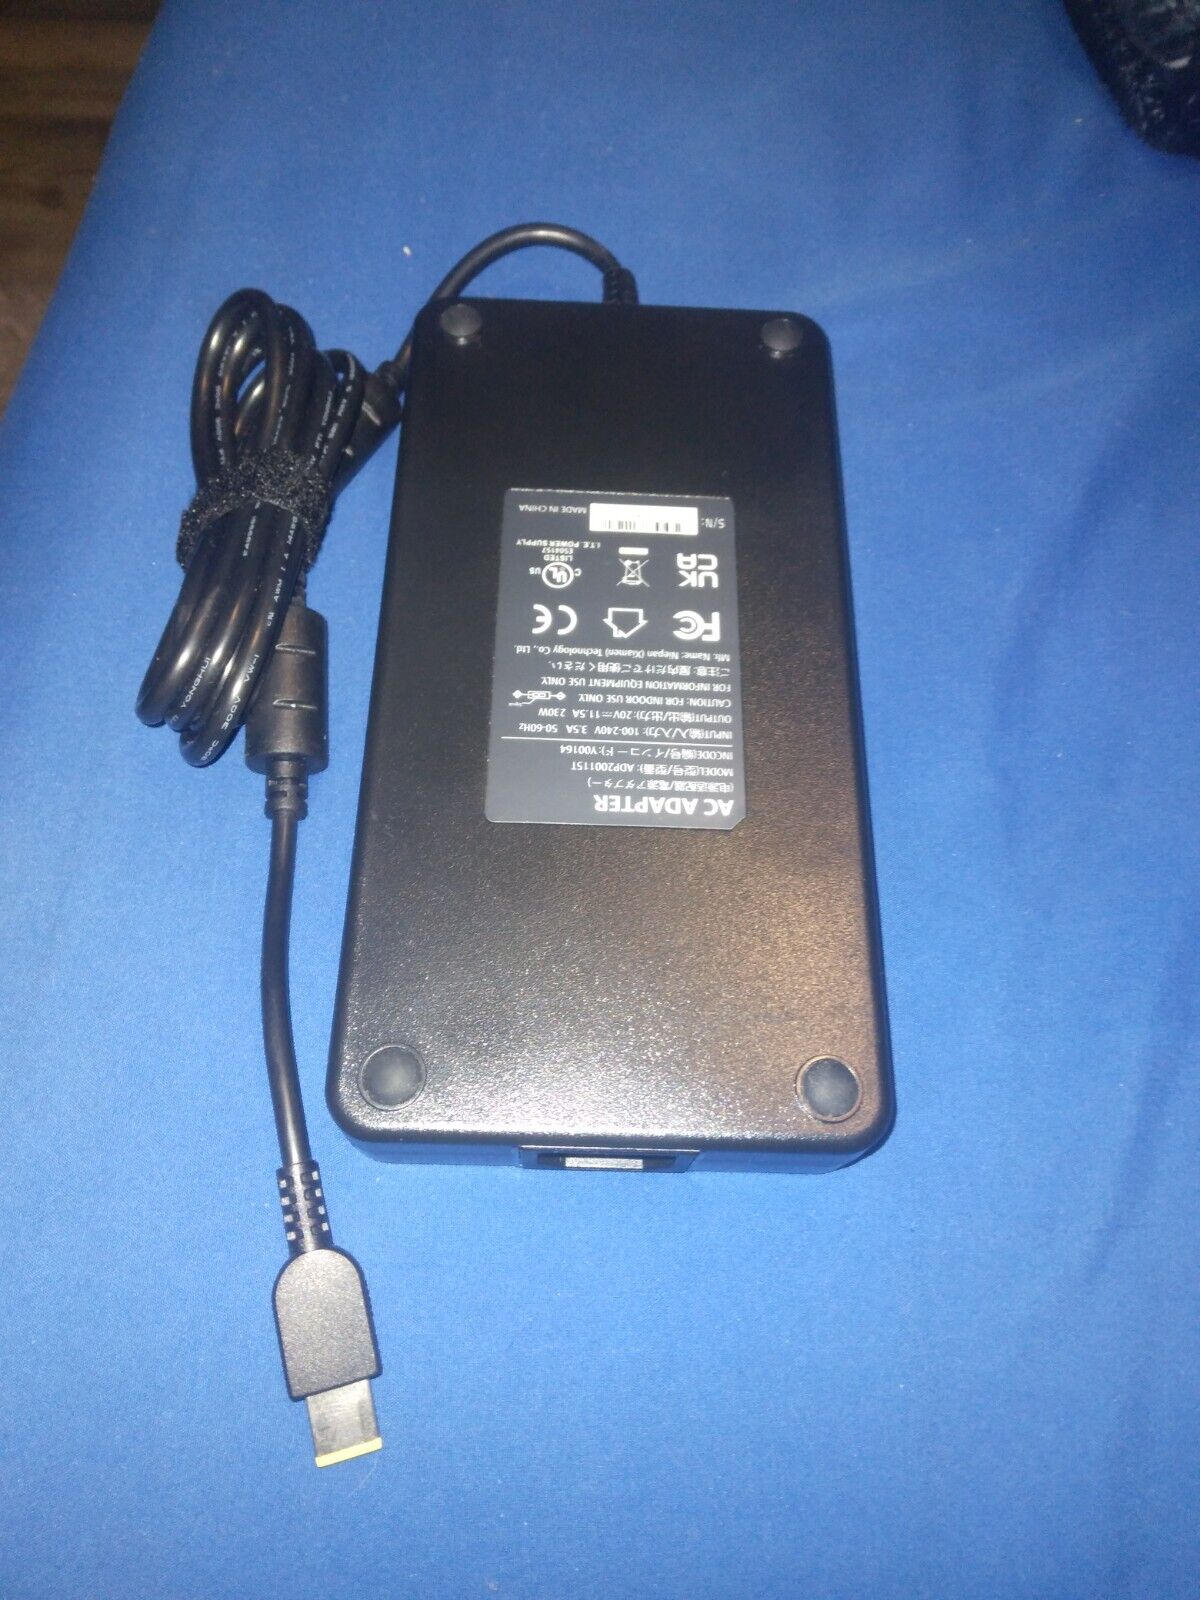 AC Adapter ADP200115T input:100-240V 50-60Hz output:20V 11.5A Only What Pictured